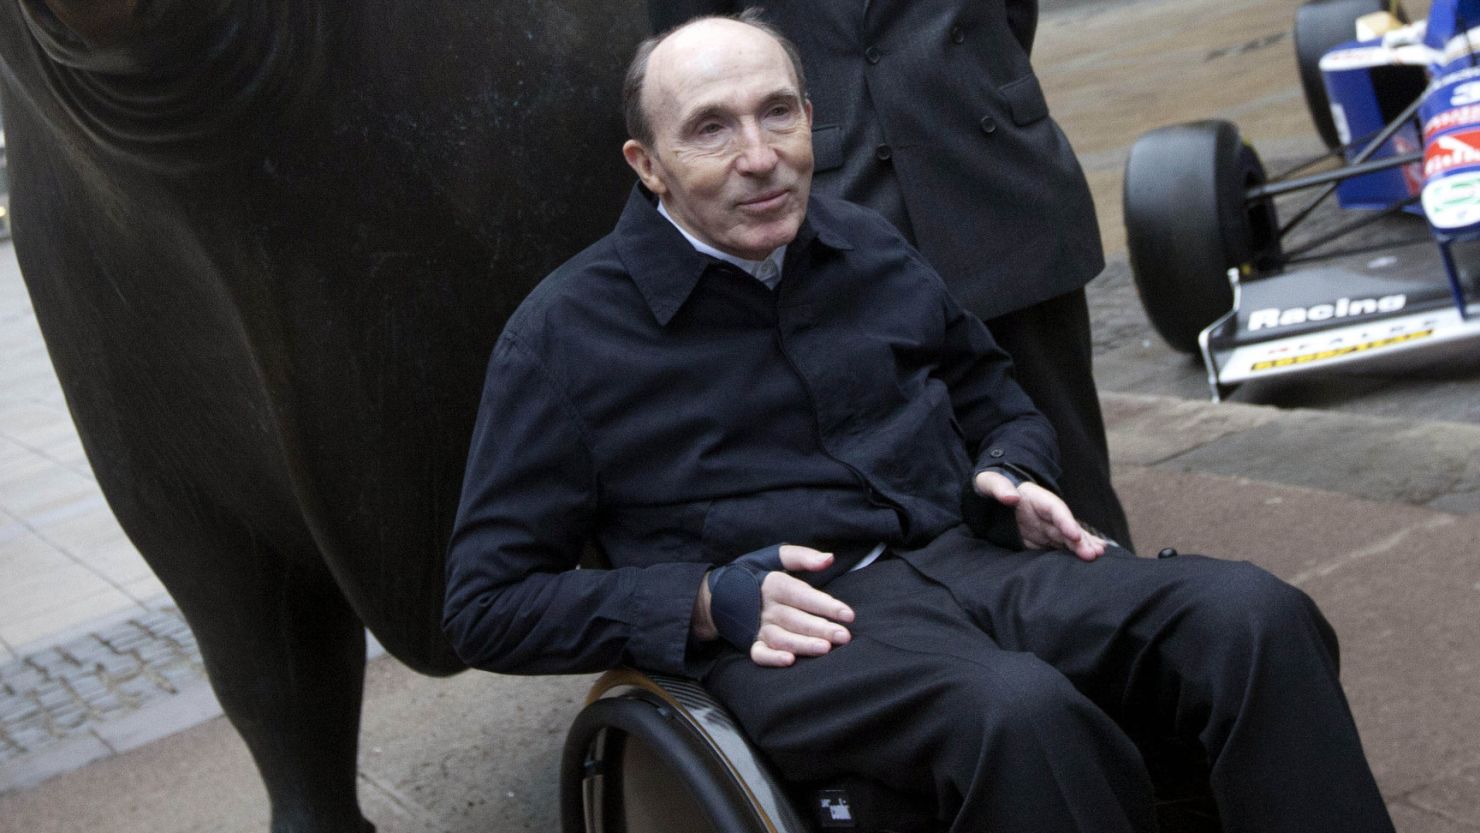 Frank Williams is tetraplegic and has been confined to a wheelchair since a car crash in 1986.